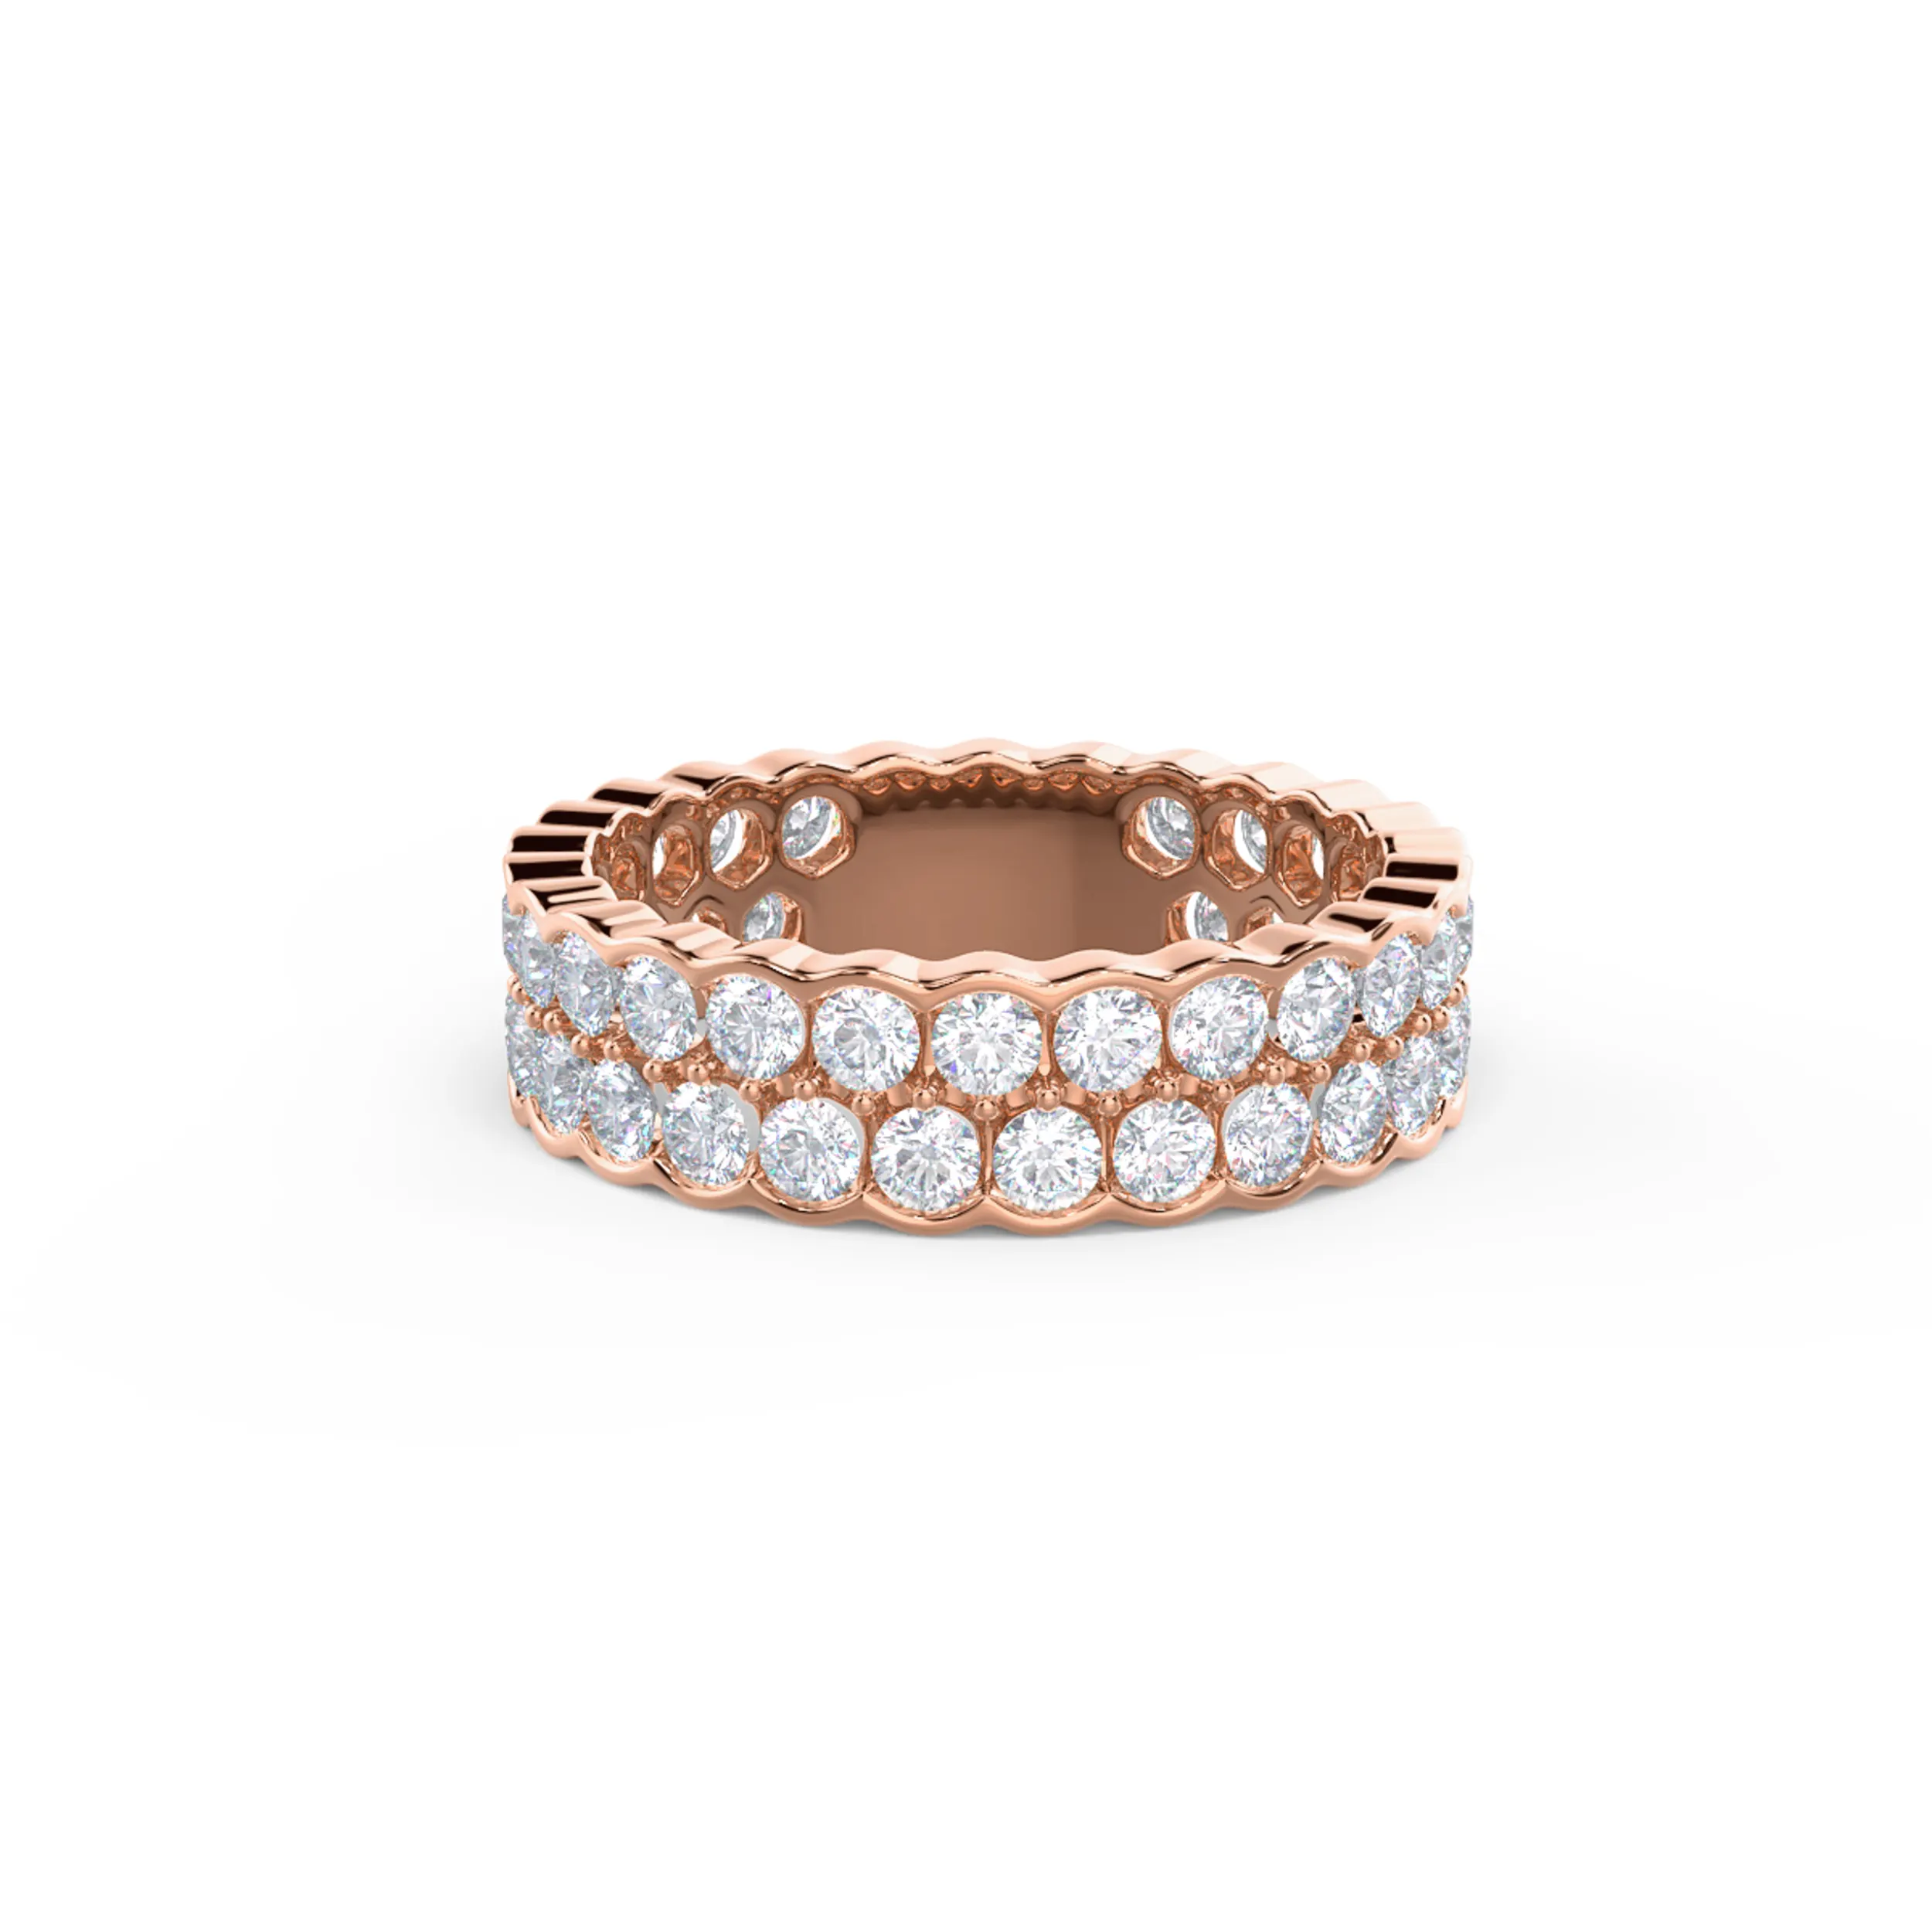 14kt Rose Gold Two Row Bezel Eternity Band featuring 2.0 ct Round Lab Diamonds (Main View)